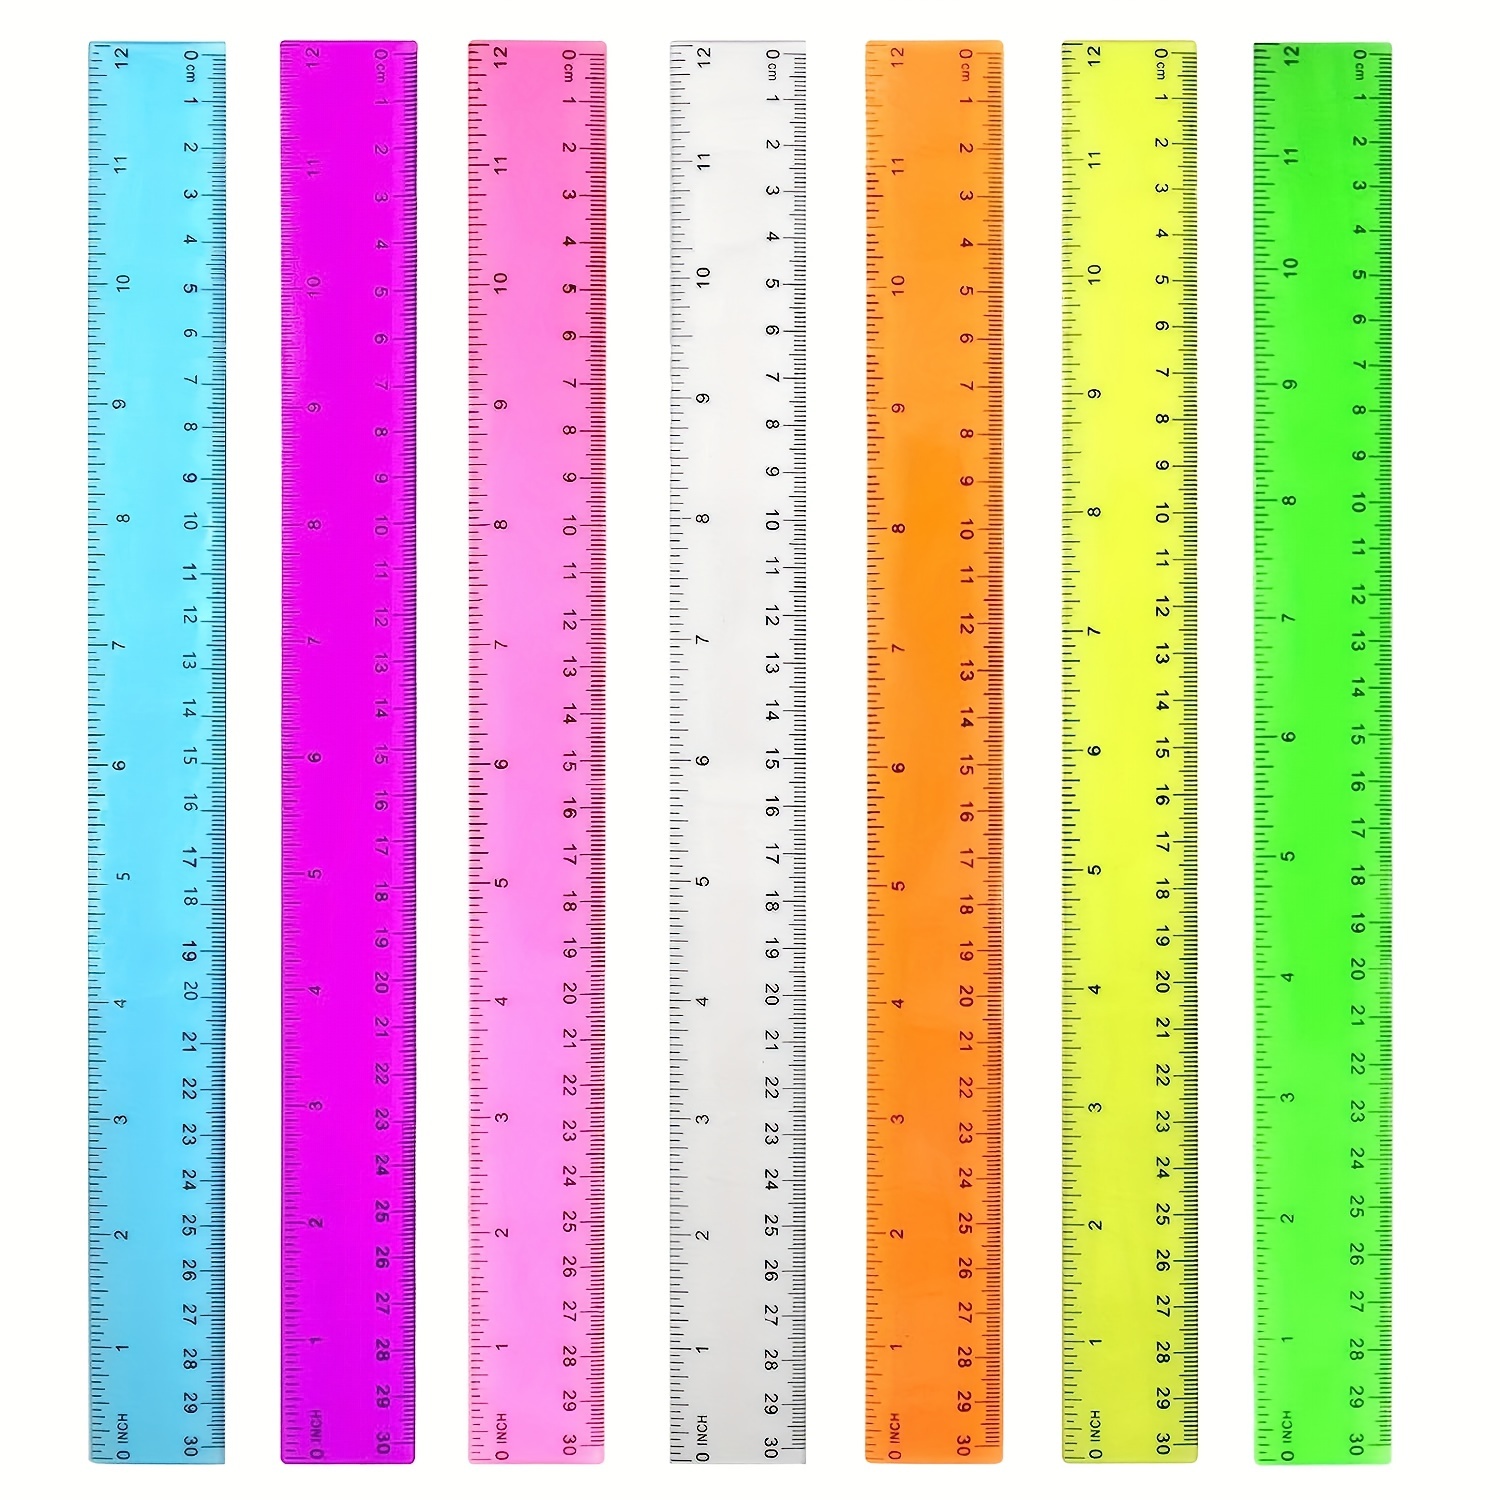 10pcs Rulers Bulk For Classroom Clear Ruler 6 Inch Ruler Clear Plastic  Ruler Flexible Rulers For Drawing Small Ruler Straight Rulers With Inches  And M